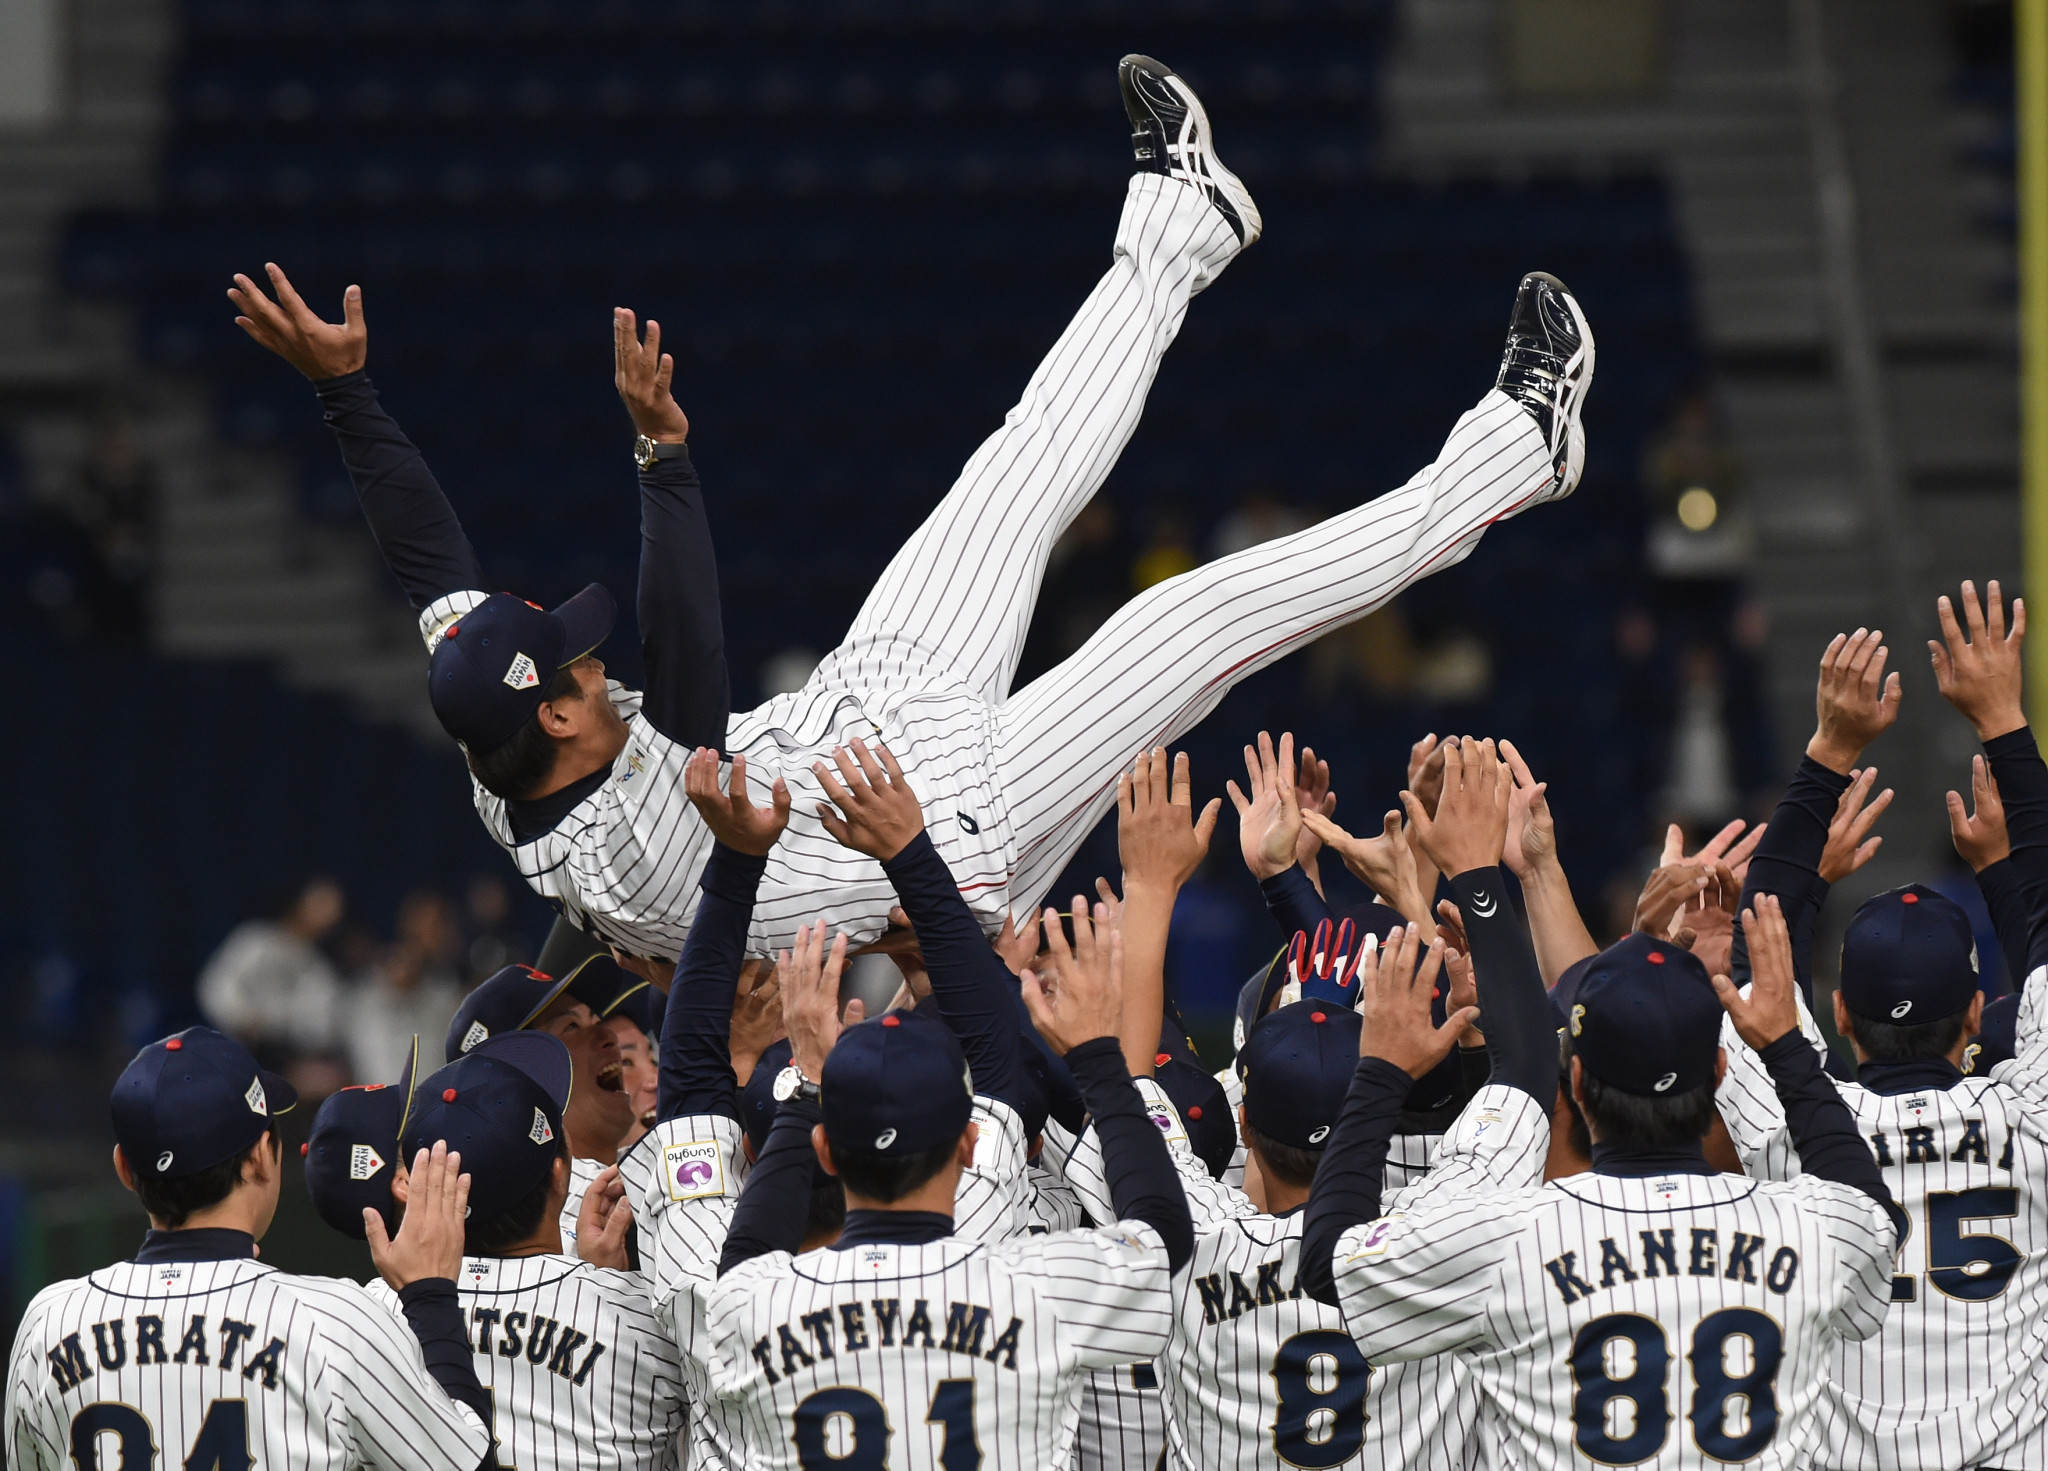 Atsunori Inaba, airborne, was manager when Japan won the 2019 WBSC Premier12 tournament ©Getty Images
